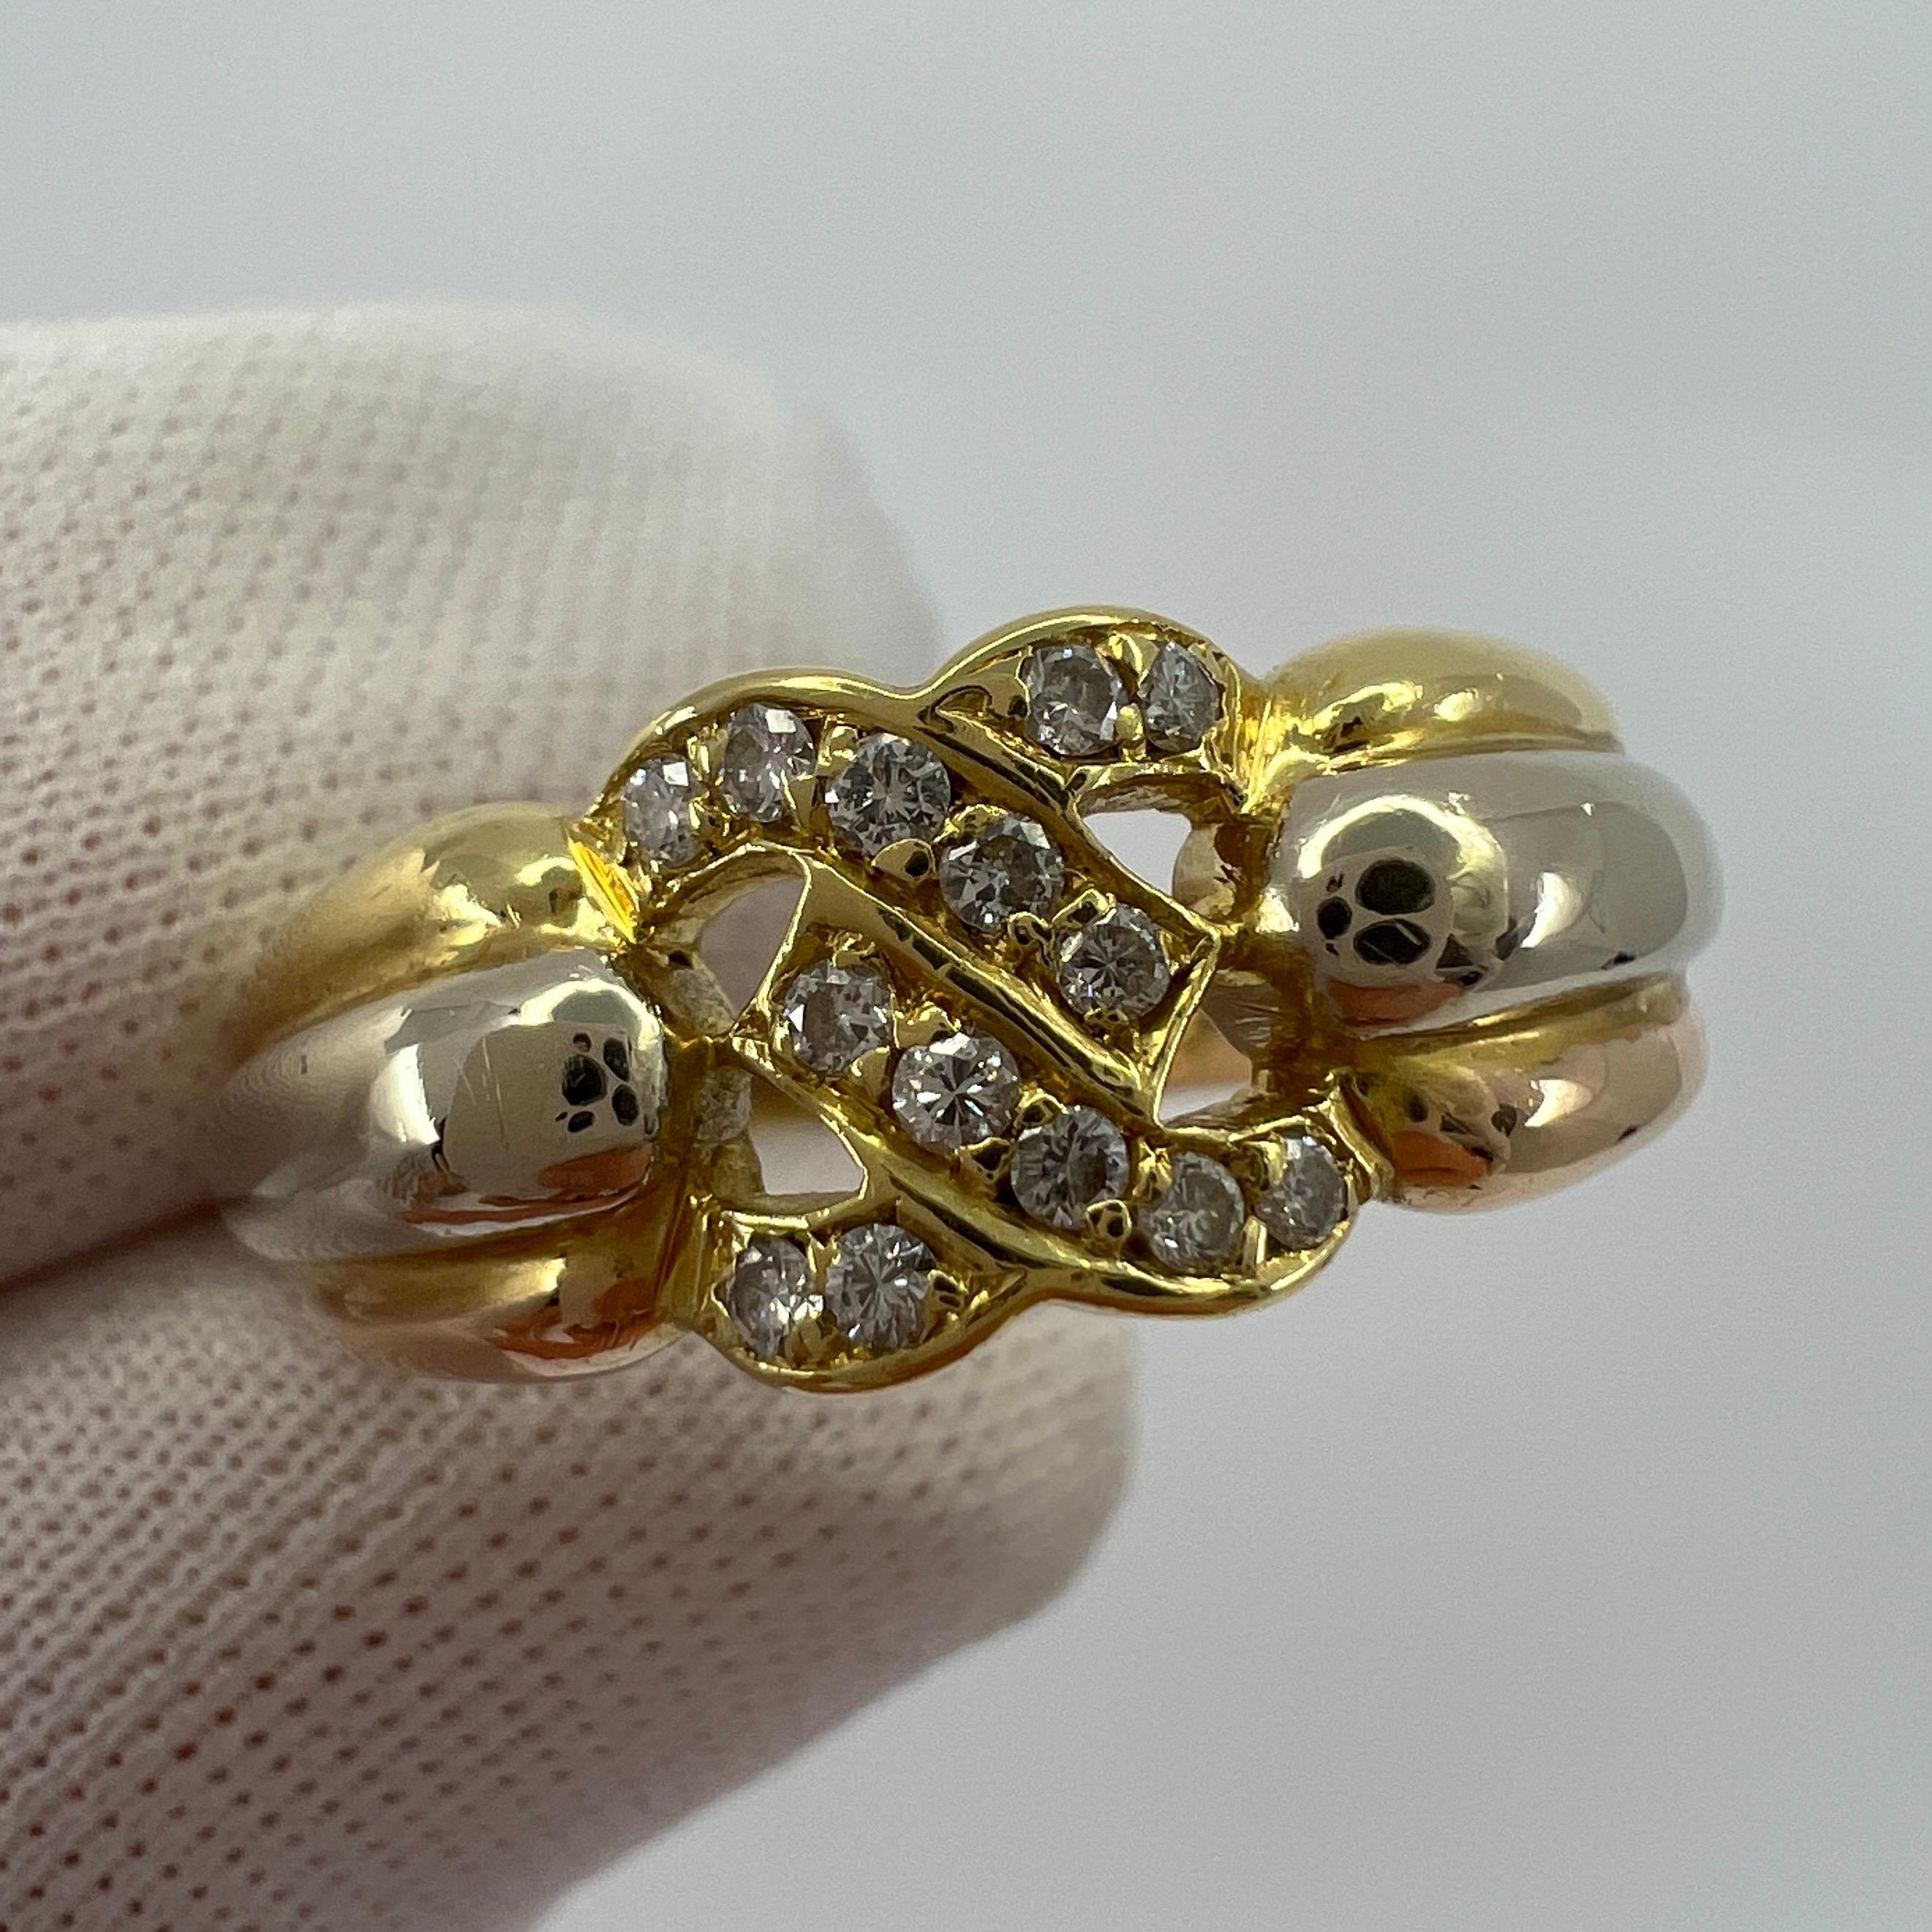 Rare Vintage Cartier C Diamond Tri Colour 18k Gold Ring.

Stunning tri colour/multi tone gold ring featuring the iconic crossed 'C' design from Cartier. 

The interlocking C's are set with 14 round colourless diamonds. G/H colour Si1-2 clarity, all